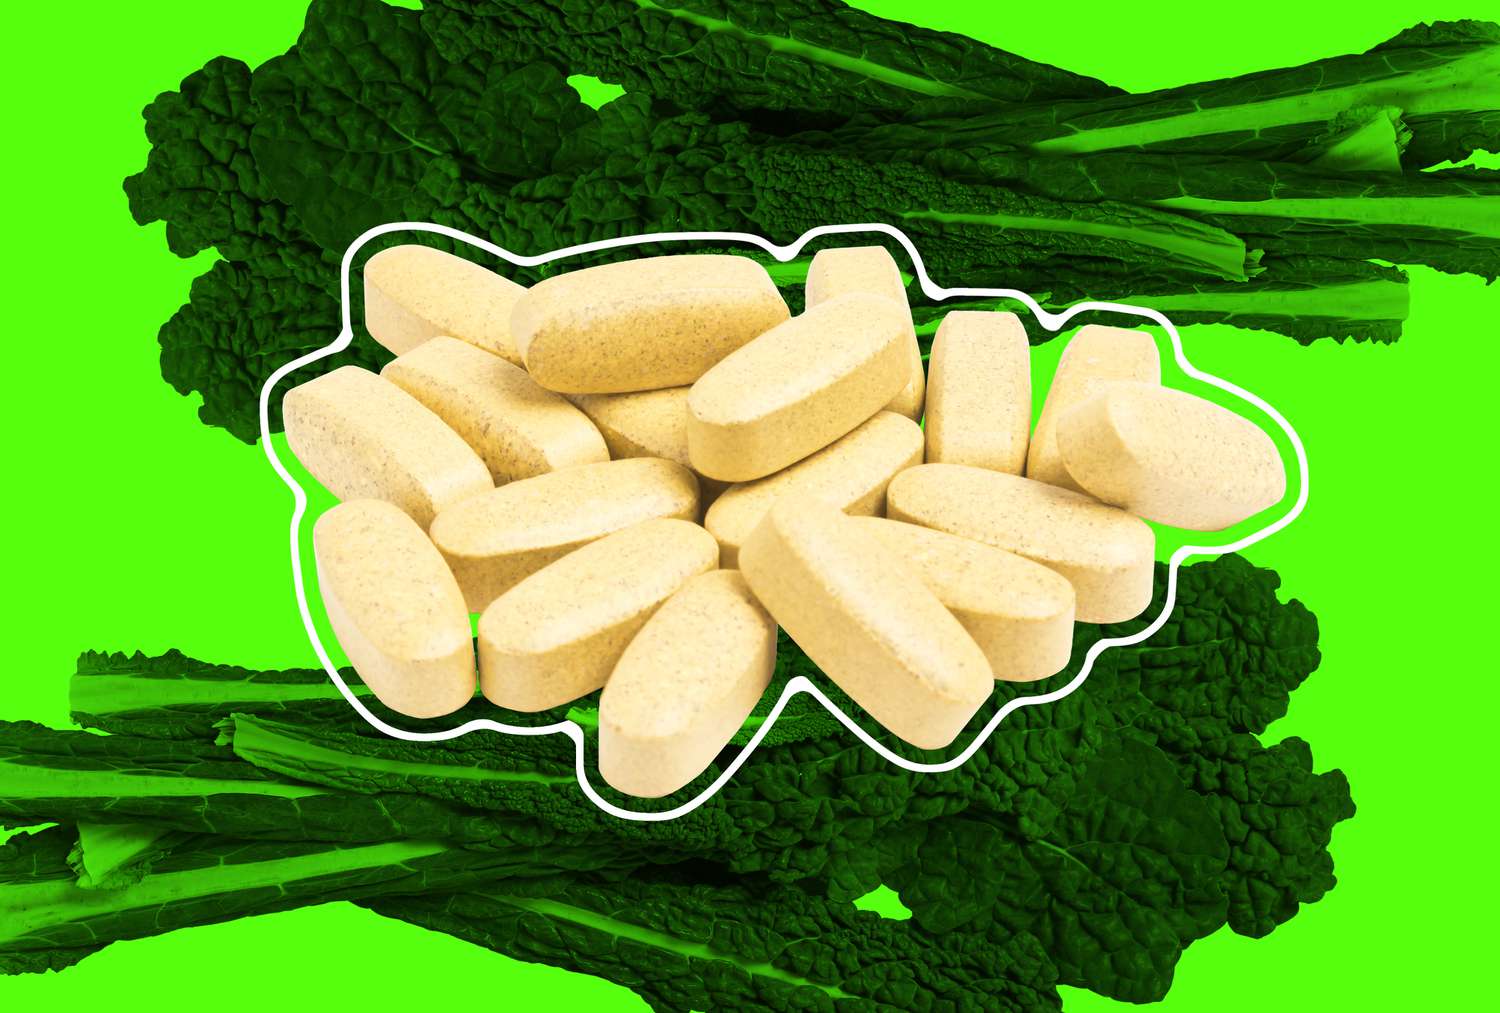 magnesium supplements and kale